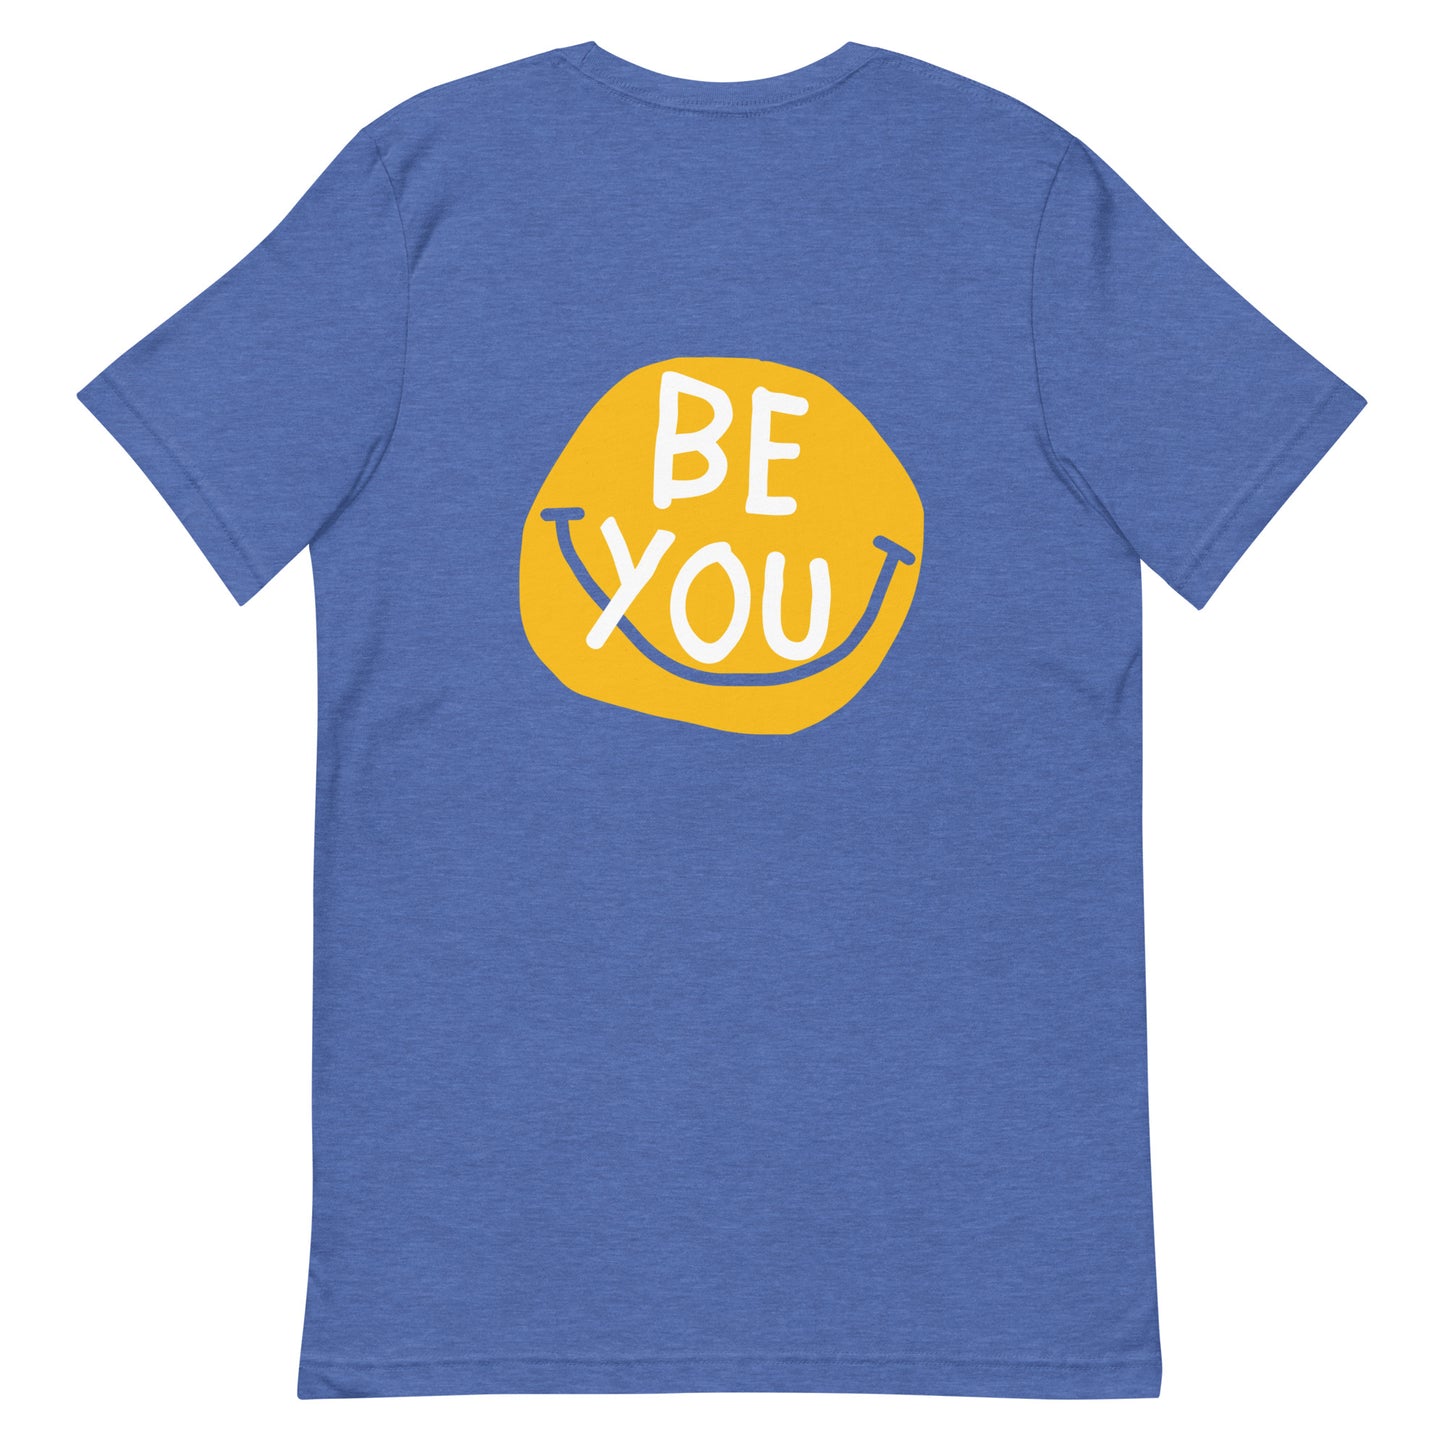 Be You Tee (7 Colors)